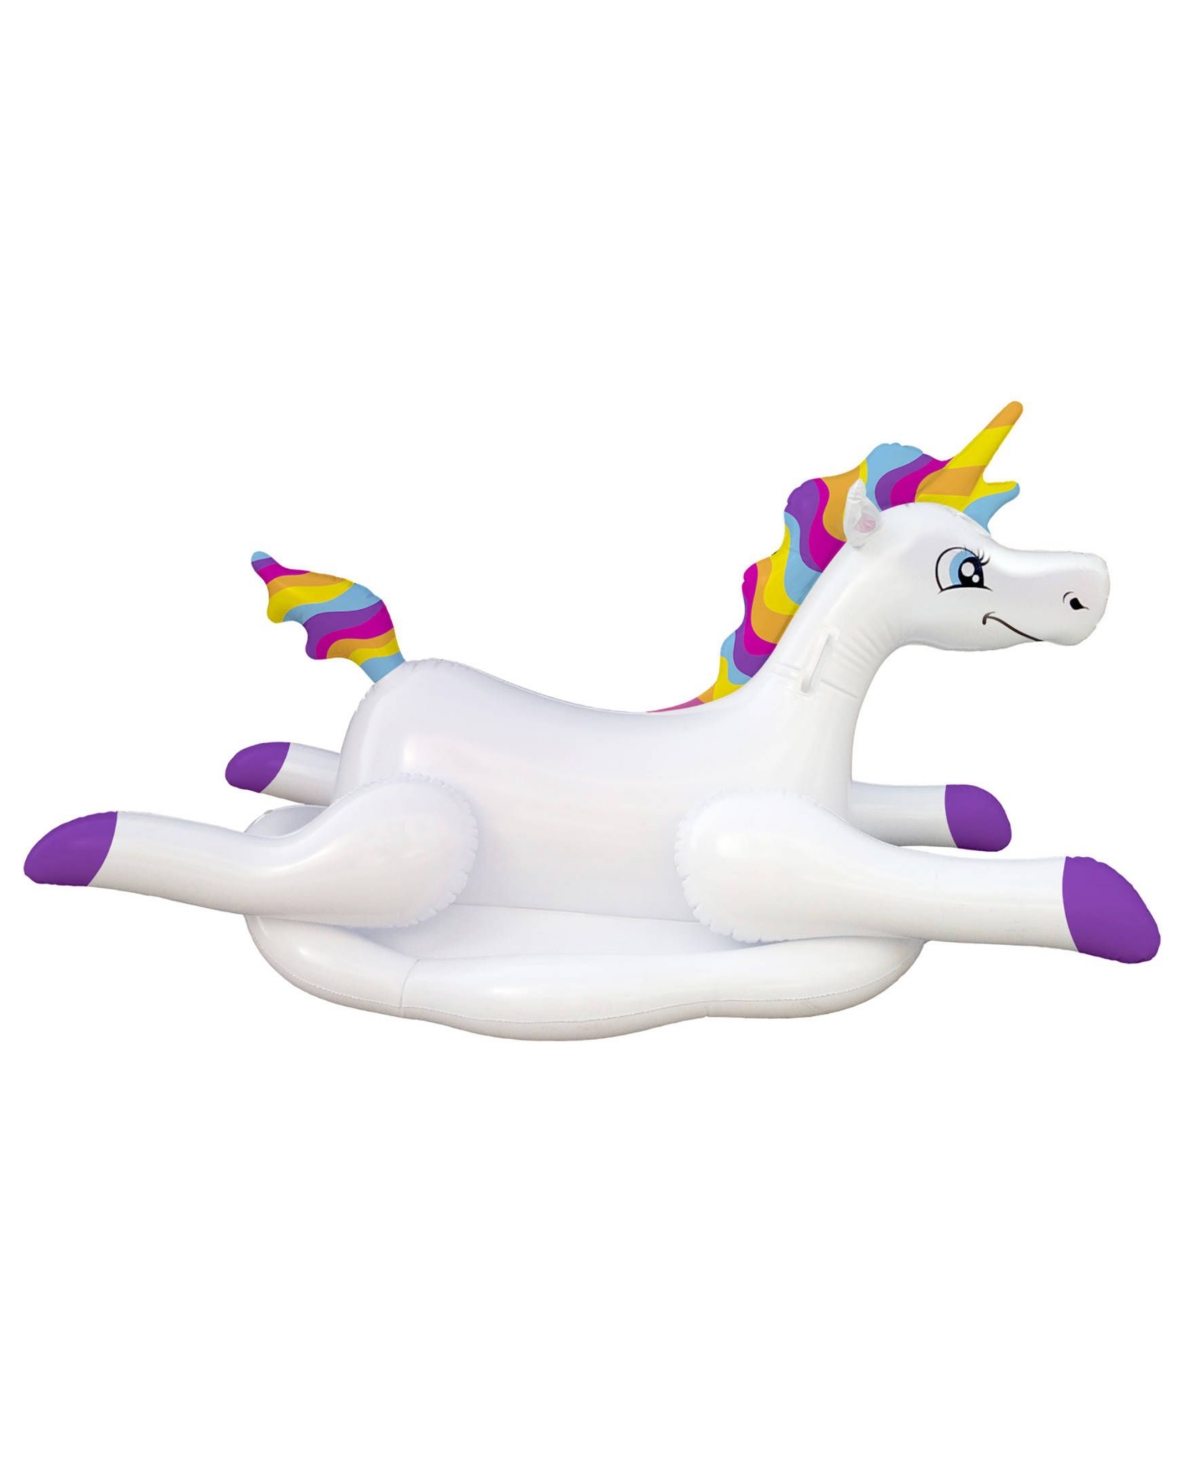 Sports Cloud Rider Rainbow Unicorn Inflatable Ride-On Swimming Pool Float - White